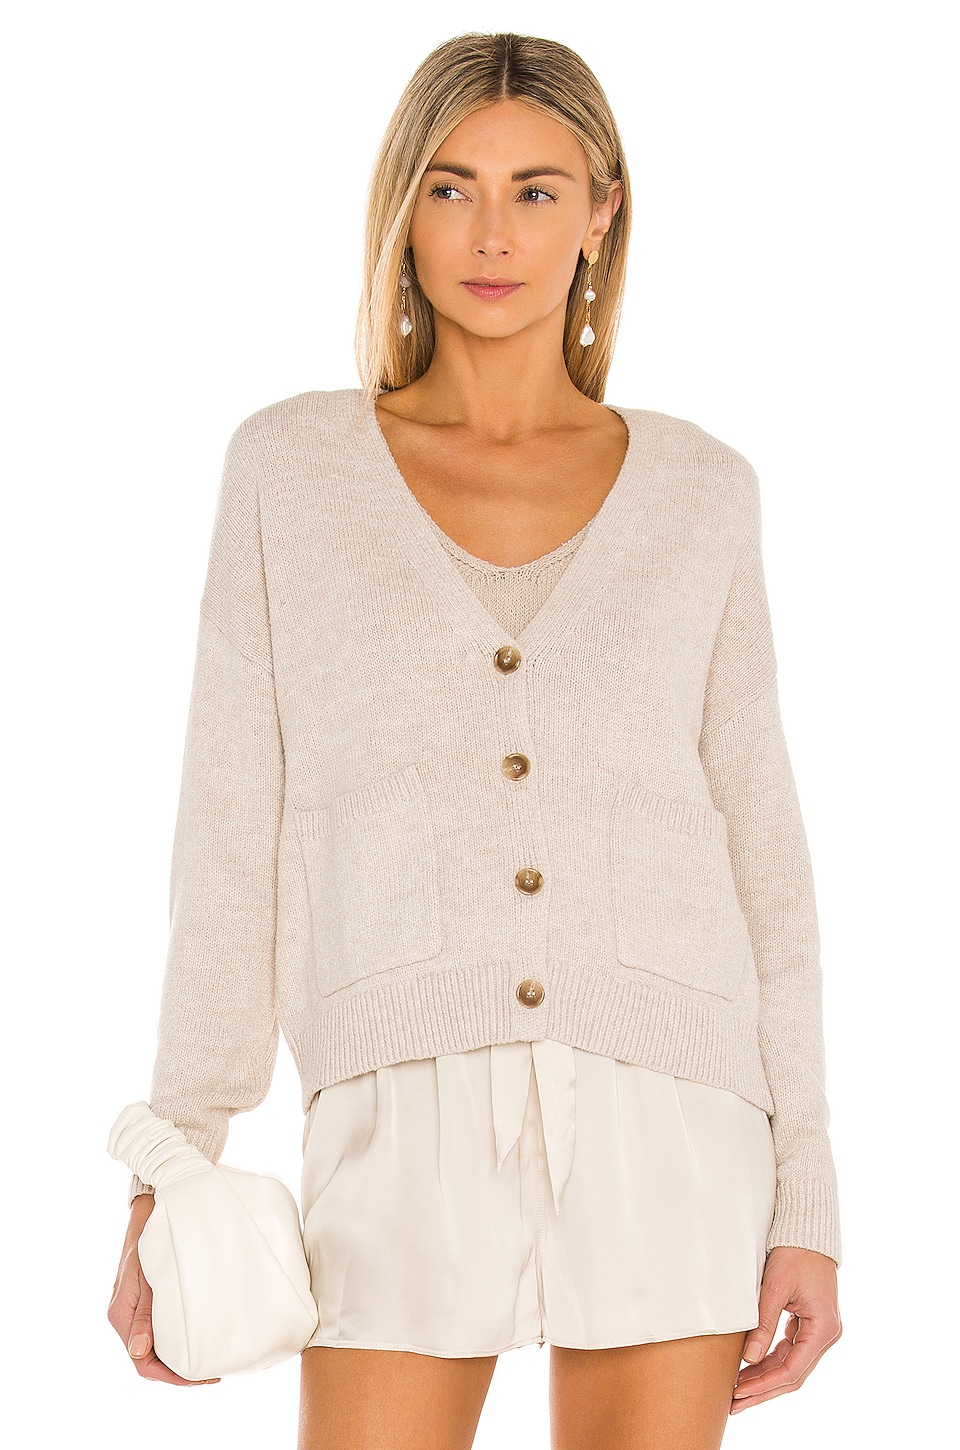 One Grey Day Olive Cardigan in Flax | REVOLVE